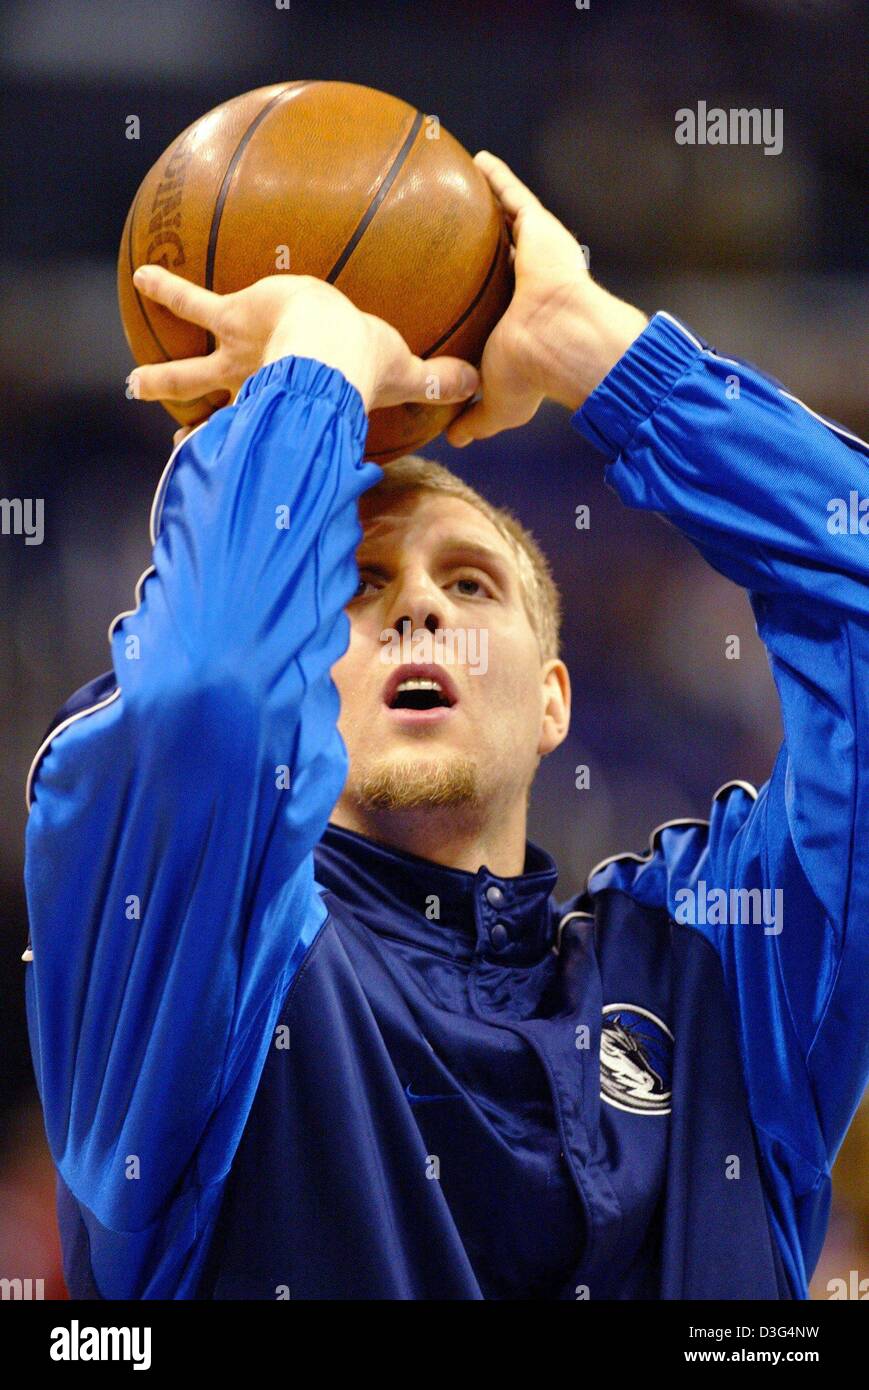 (dpa) - German basketball pro Dirk Nowitzki, who plays for the Dallas Mavericks, practices with a basketball before the start of the NBA championship match between Dallas Mavericks and Los Angeles Lakers in Los Angeles, California, USA, 13 December 2003. Dallas won the game by a score of 110-93. It was the first victory in 13 years against the Lakers who had previously won against  Stock Photo